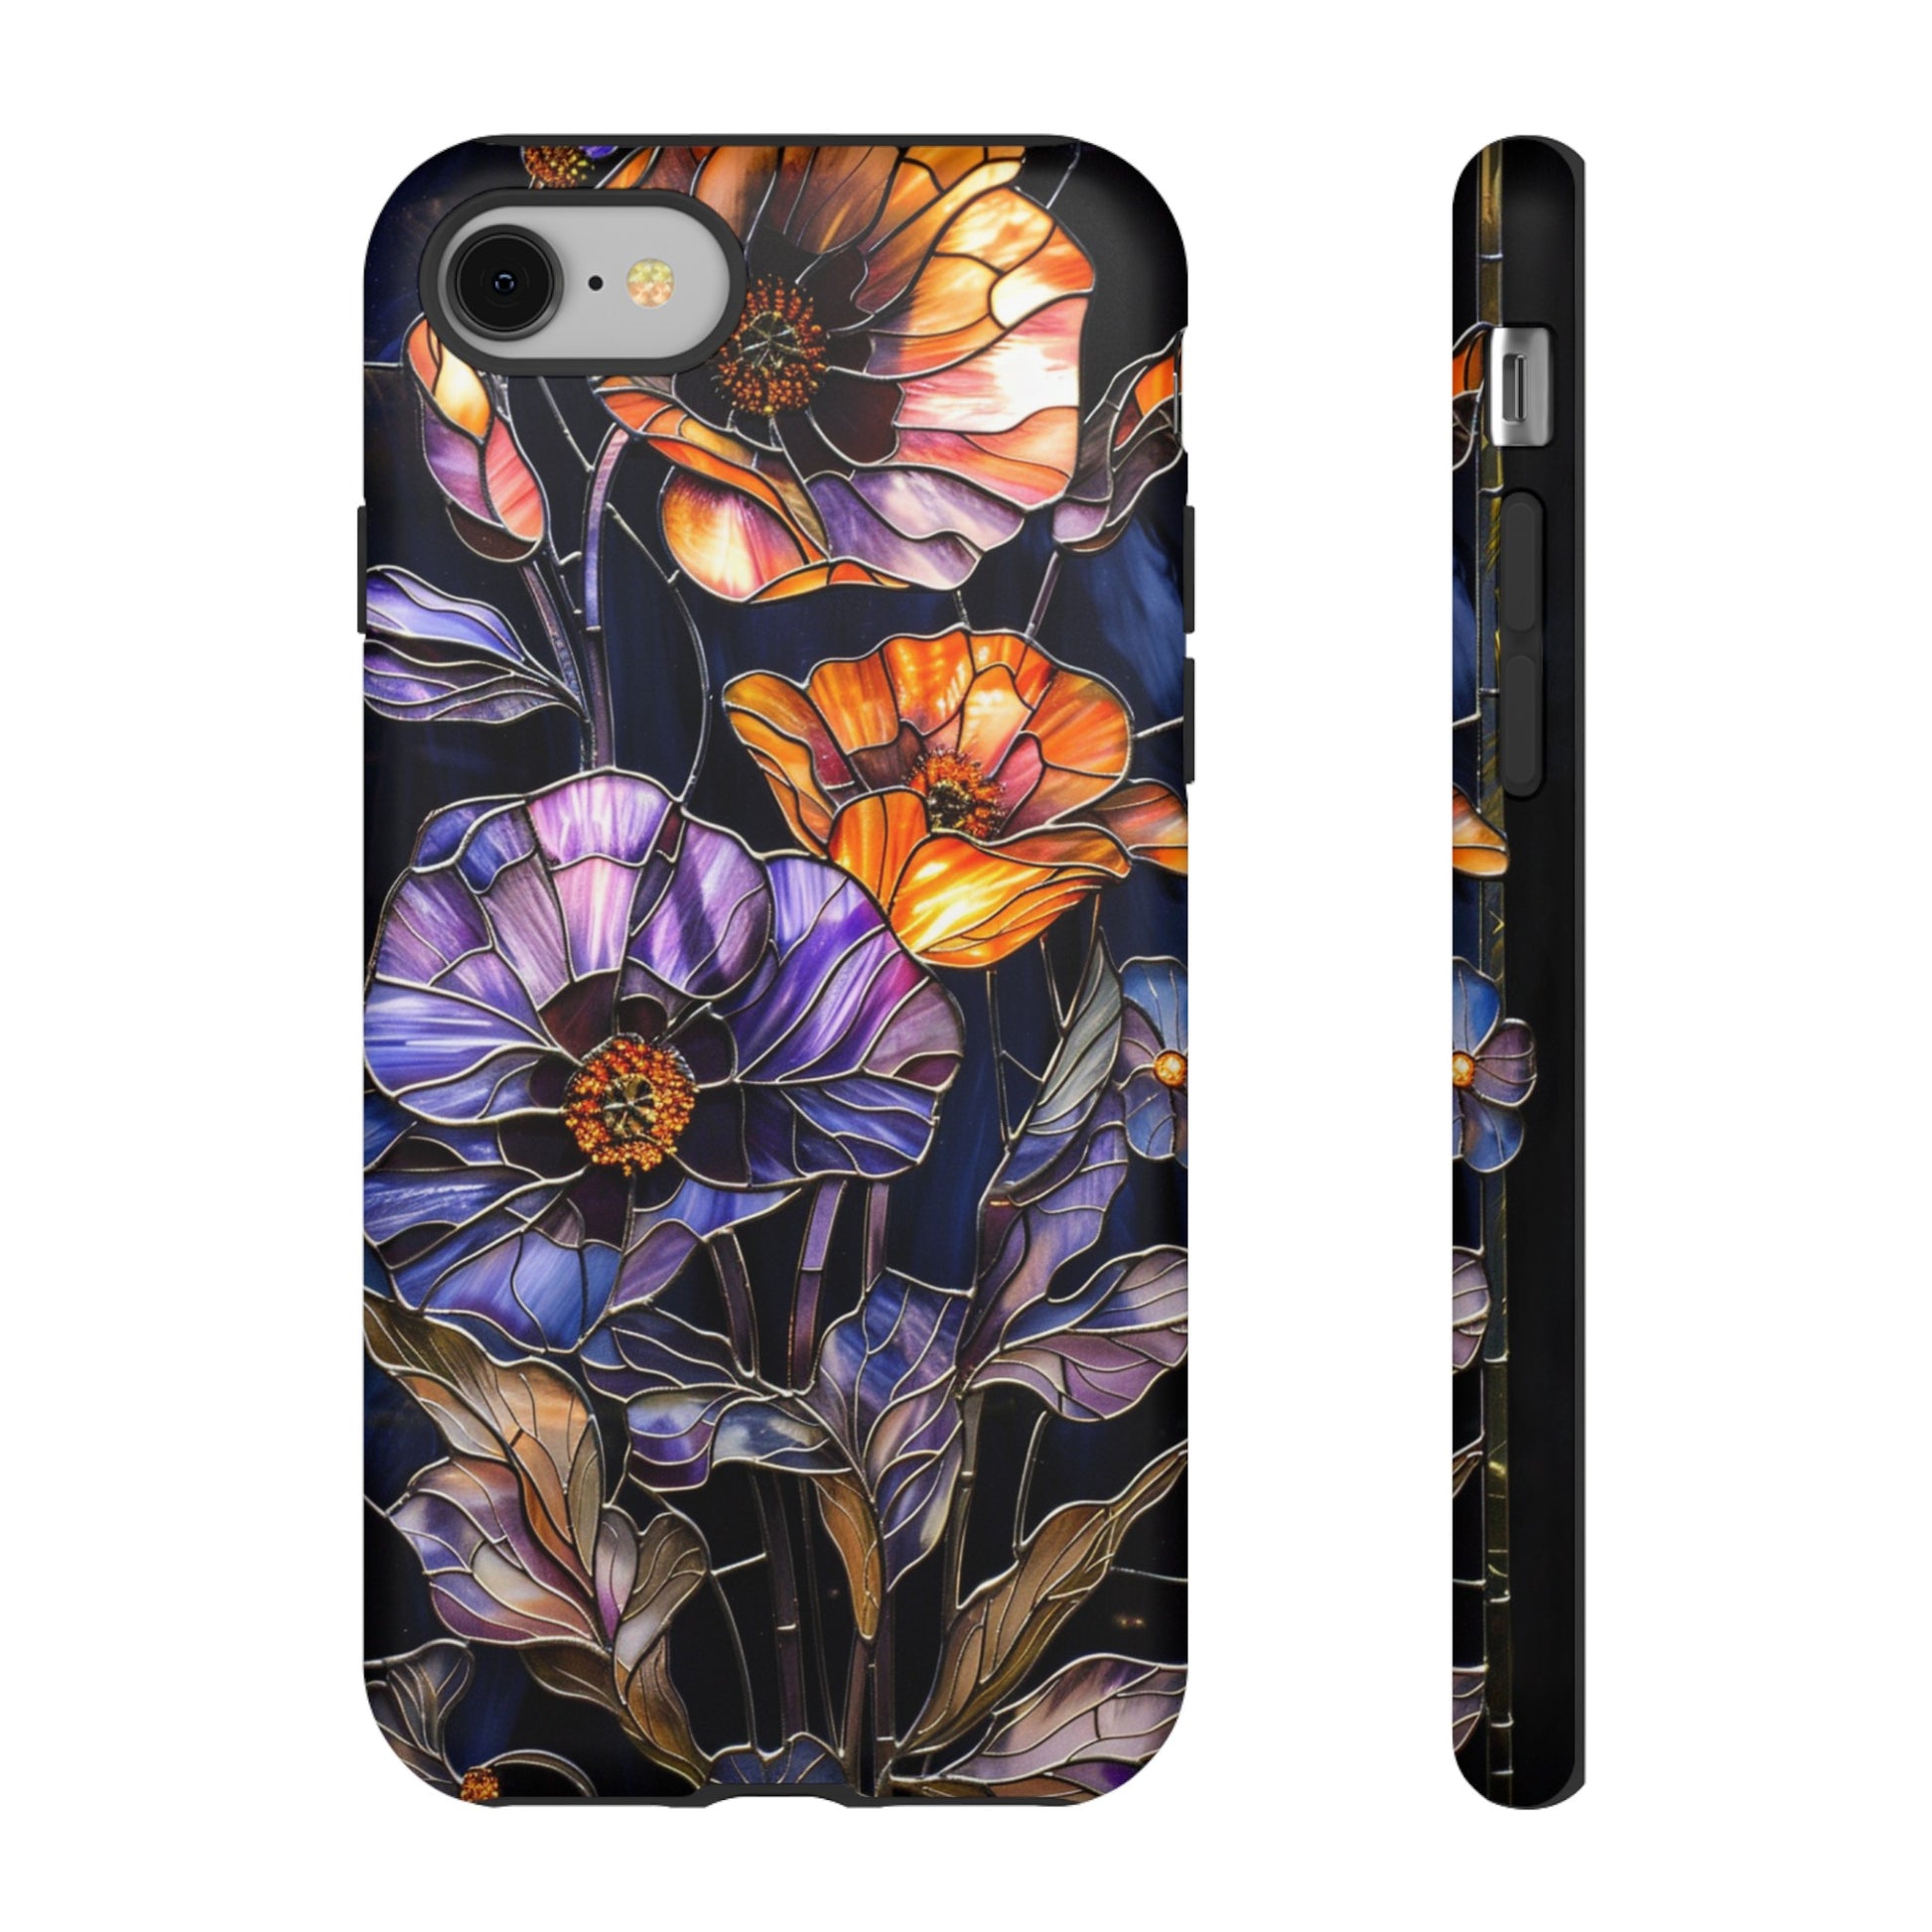 Elegant stained glass floral phone case for Google Pixel